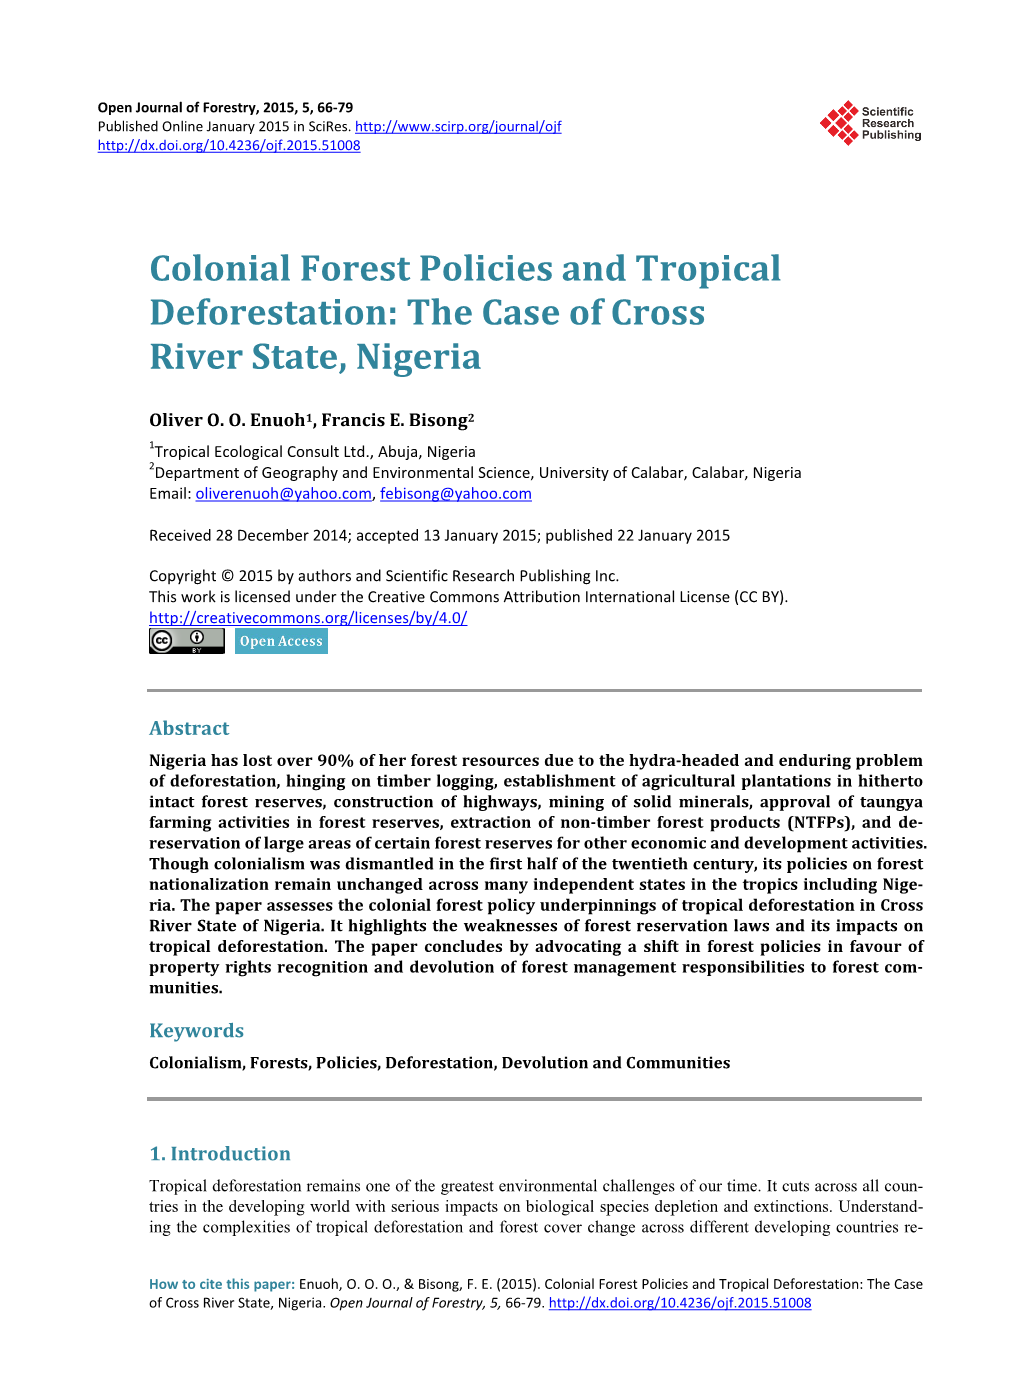 Colonial Forest Policies and Tropical Deforestation: the Case of Cross River State, Nigeria